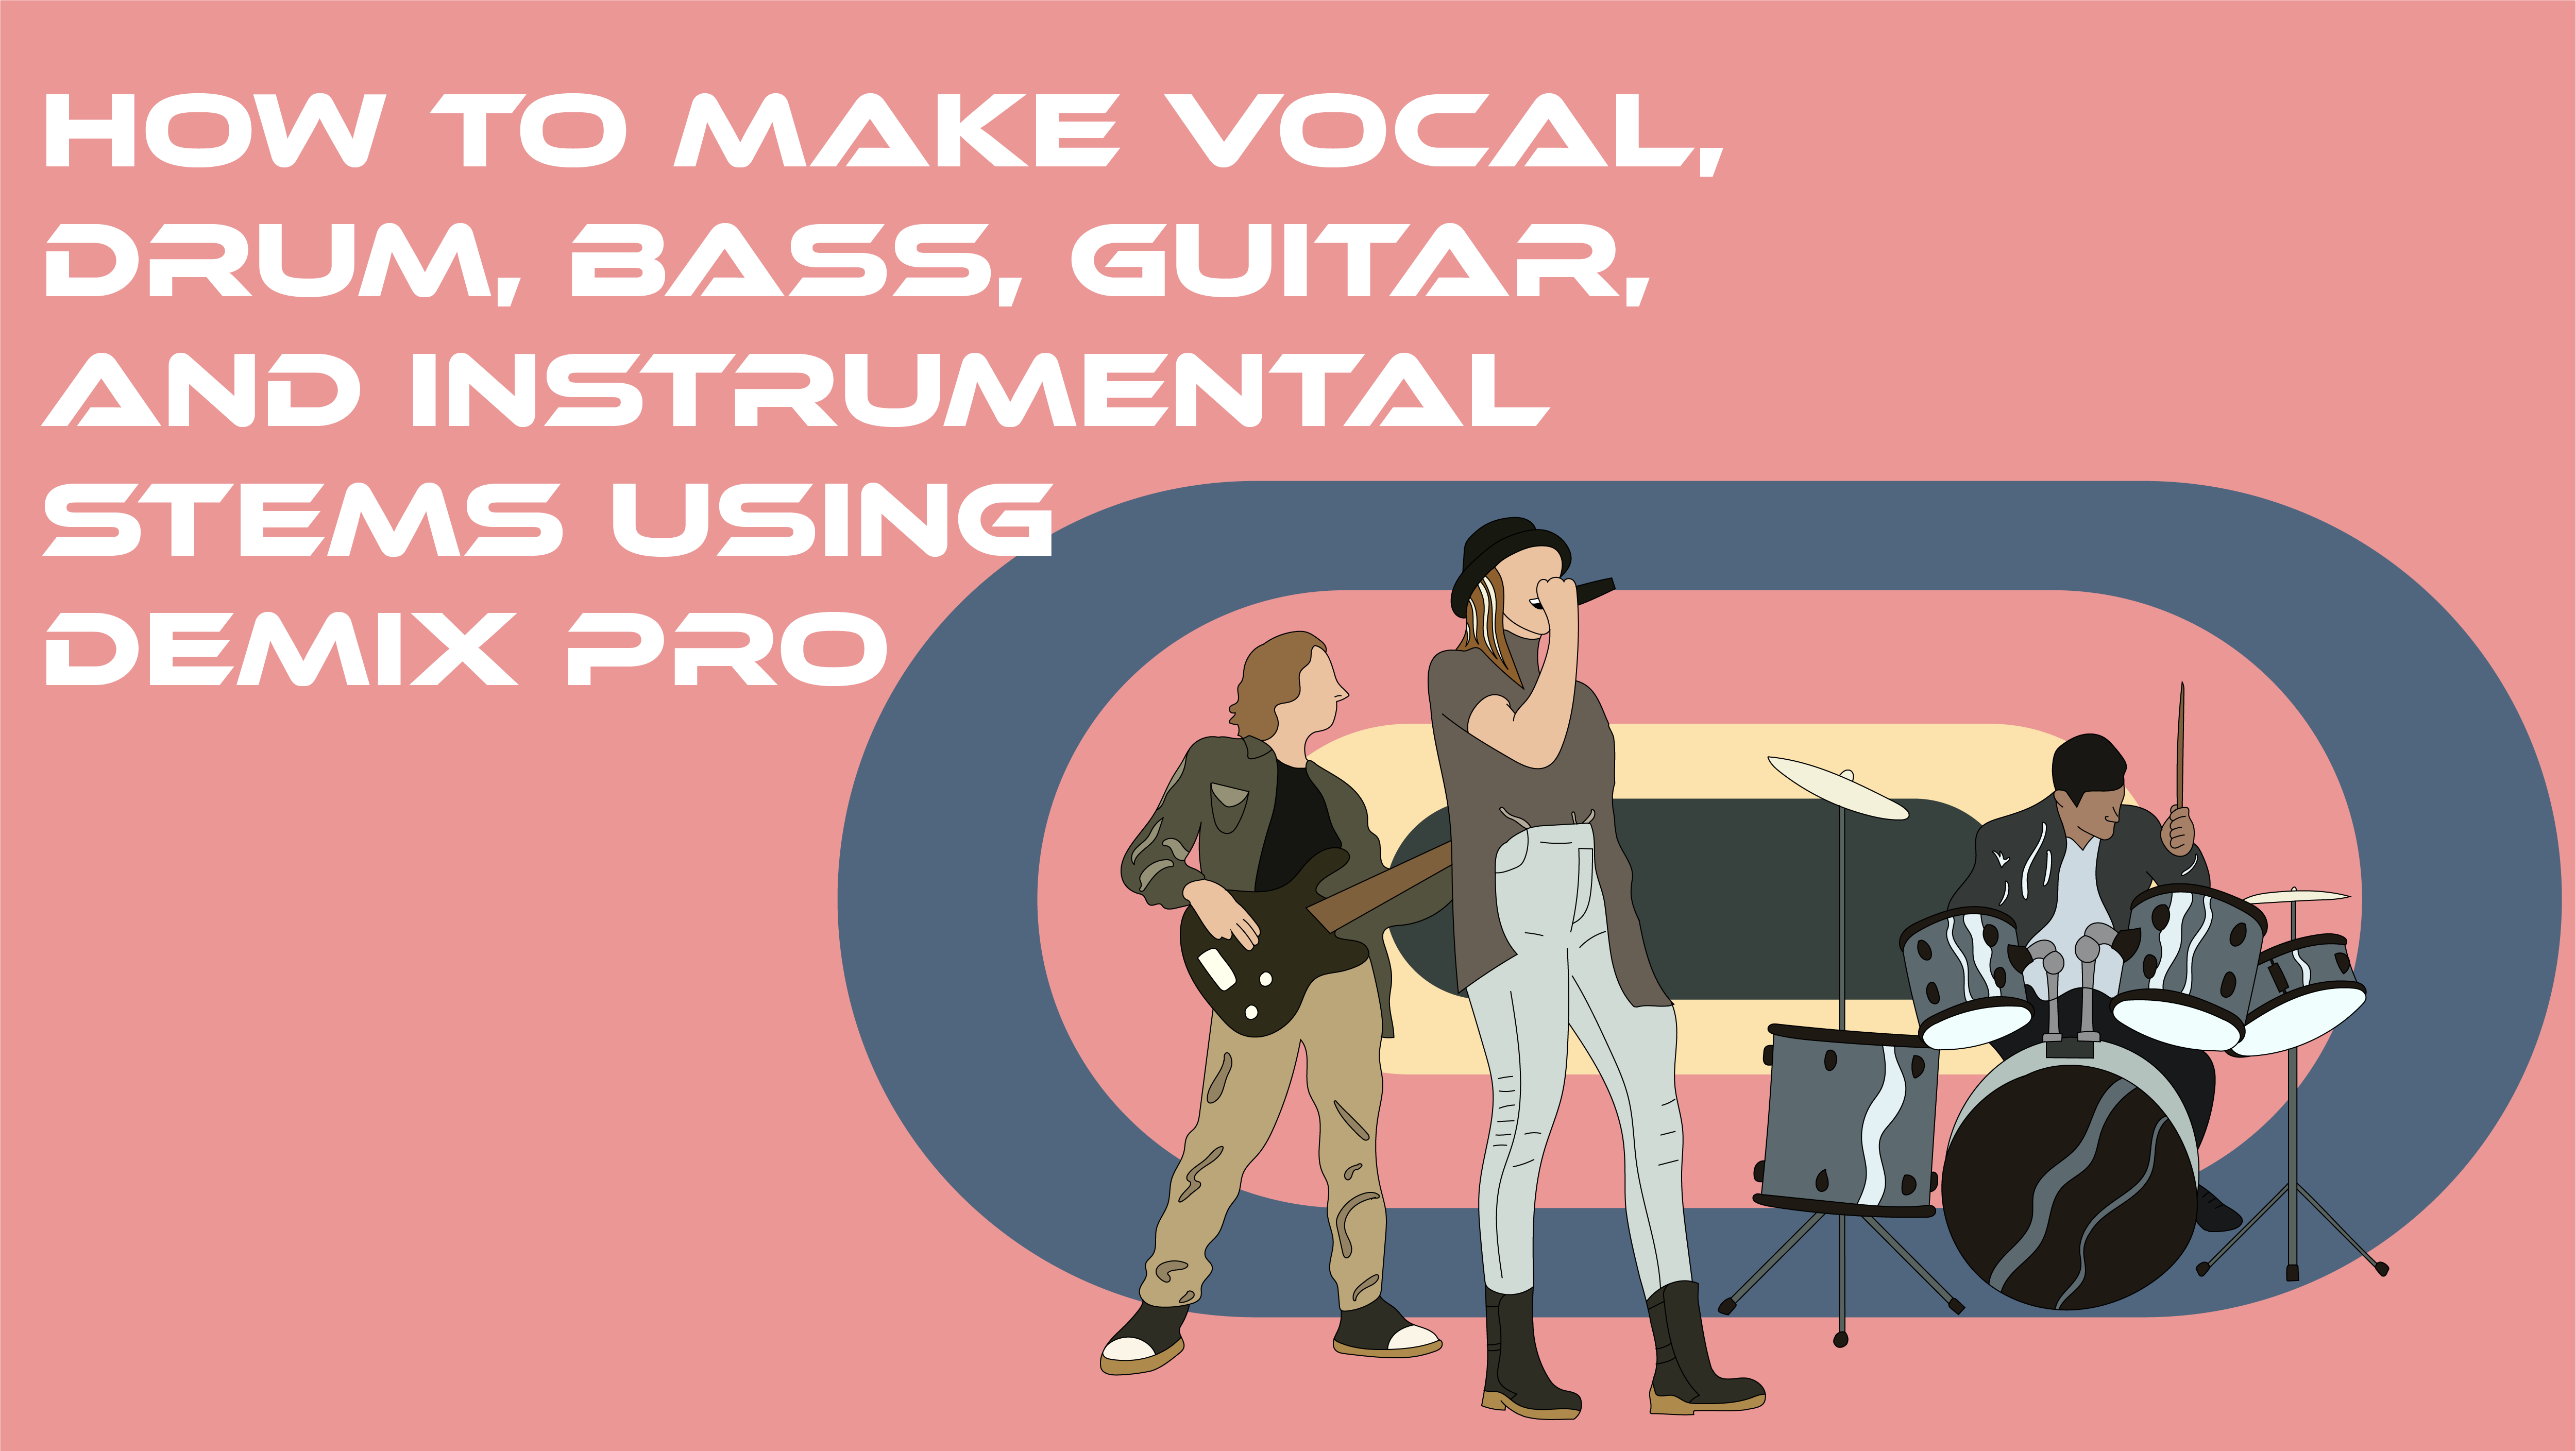 How to Make Vocal, Drum, Bass, Guitar, and Instrumental Stems Using DeMix Pro